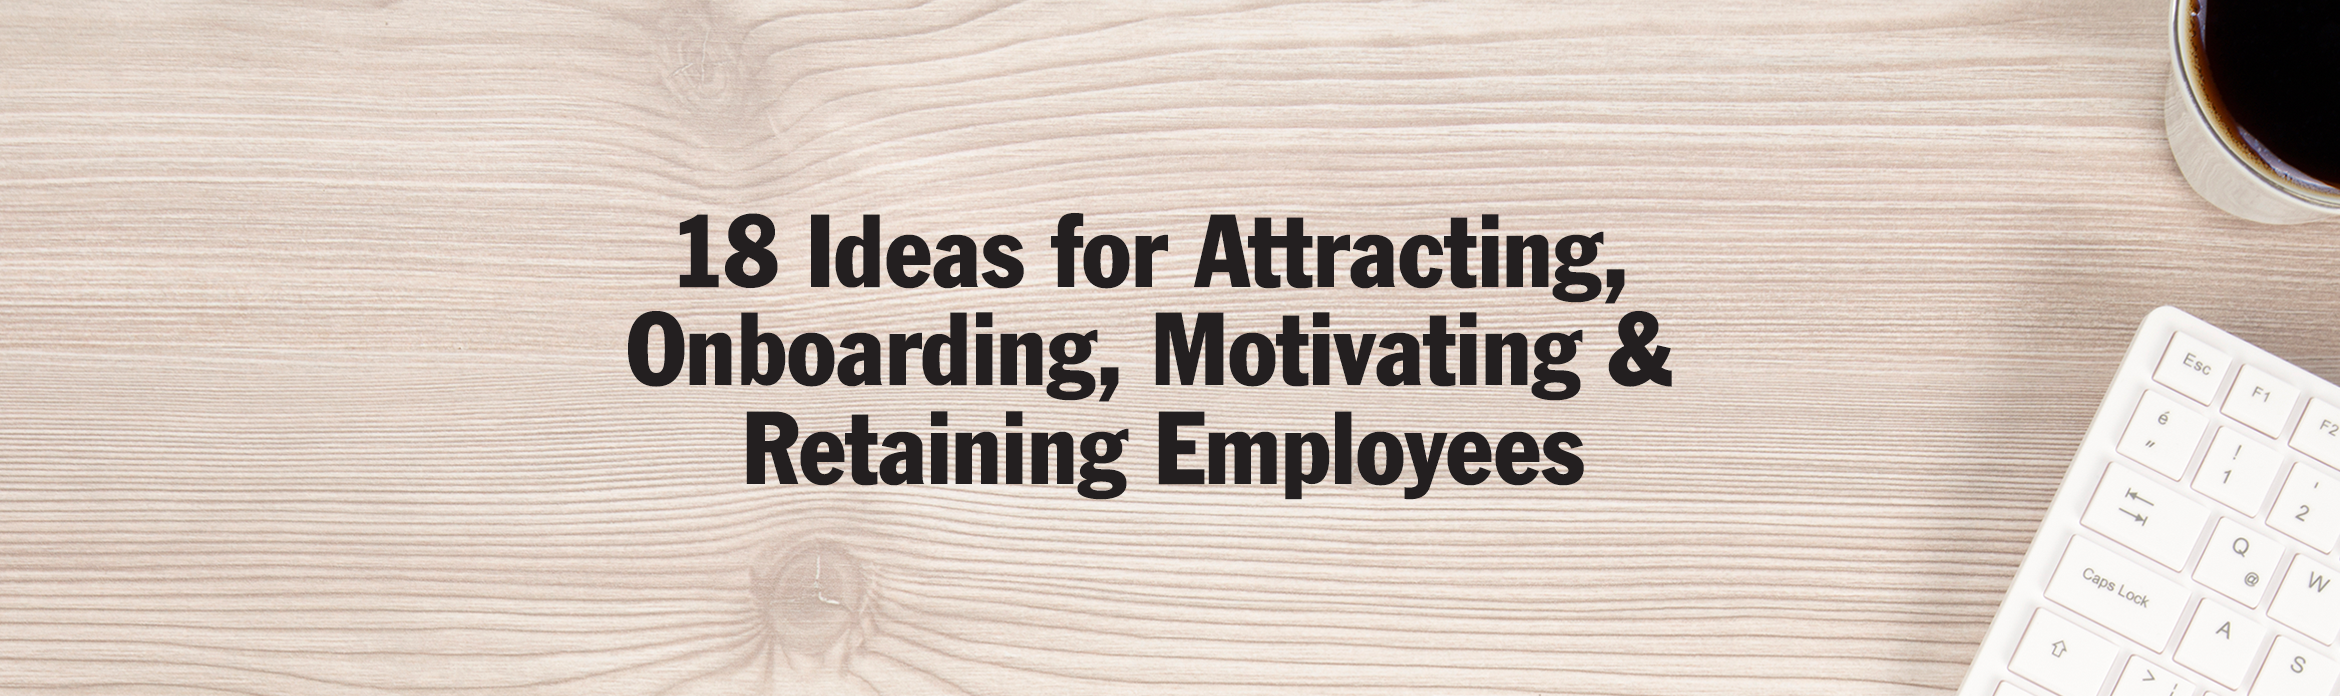 18 Ideas for Attracting, Onboarding, Motivating & Retaining Employees